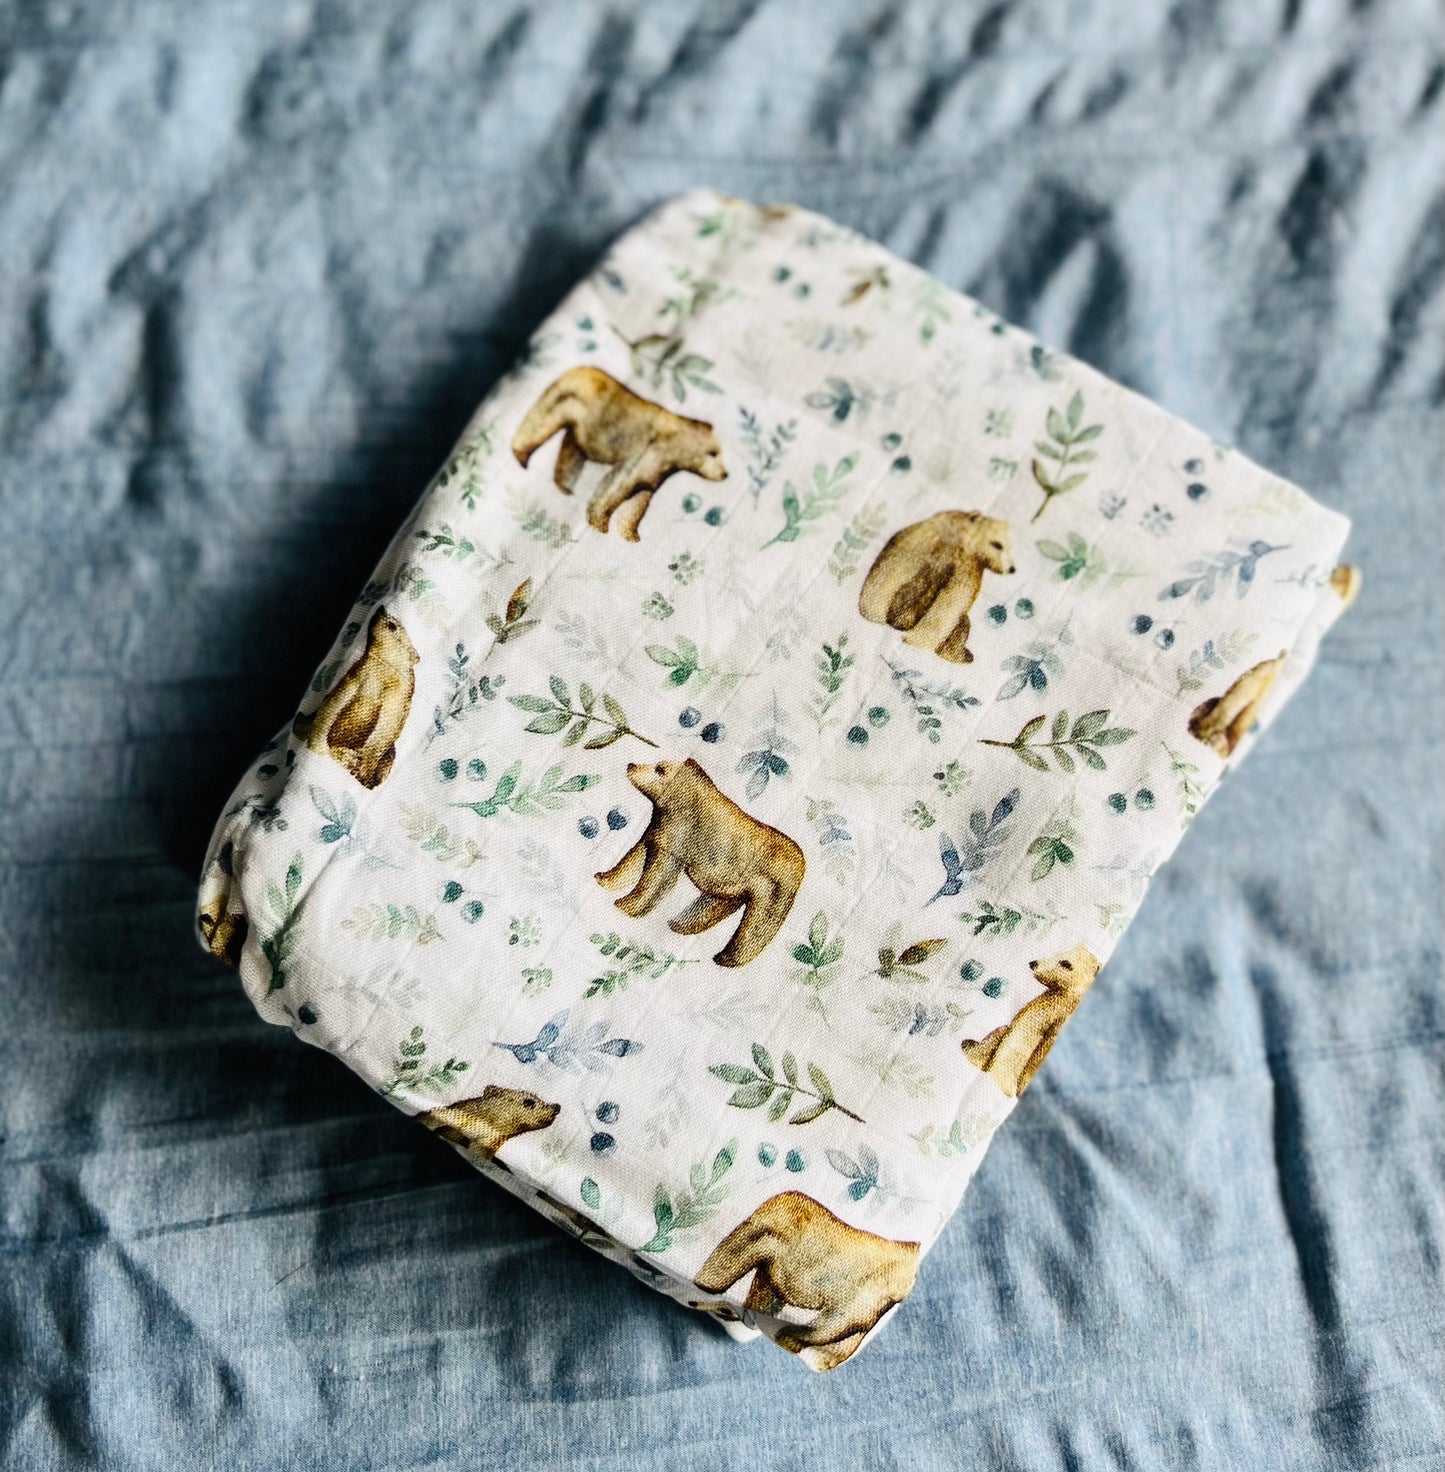 The Bears Bamboo Cotton Swaddle